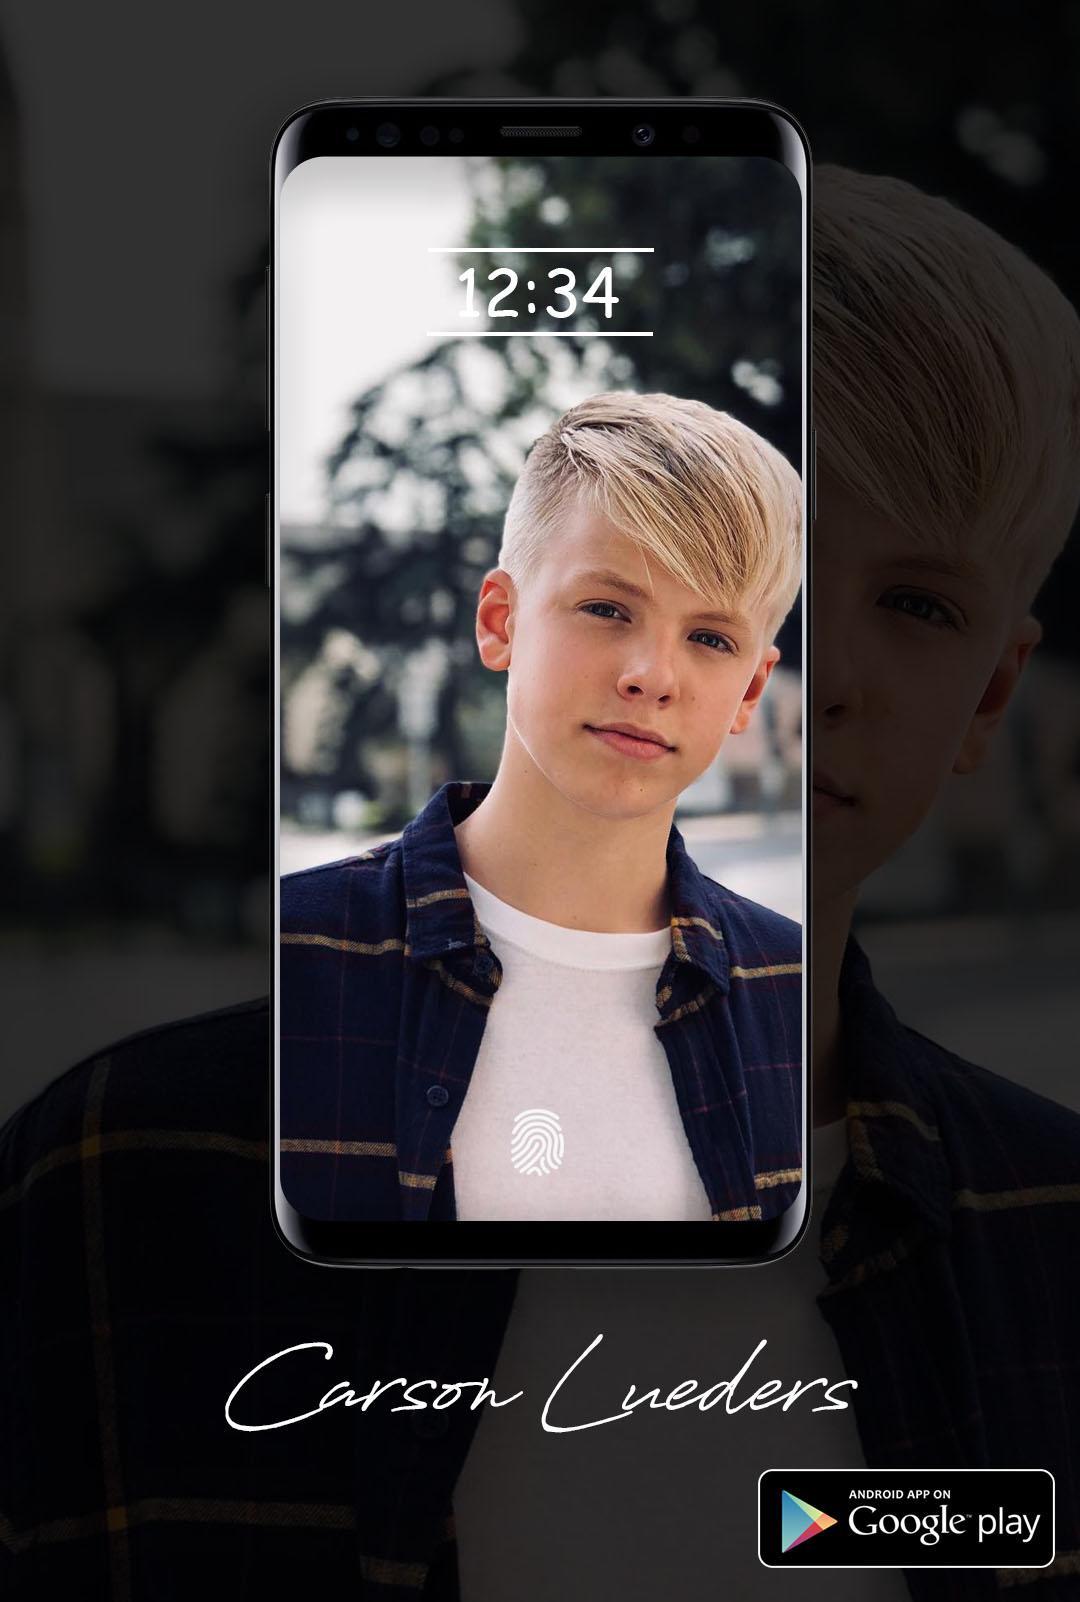 Carson Lueders Wallpaper